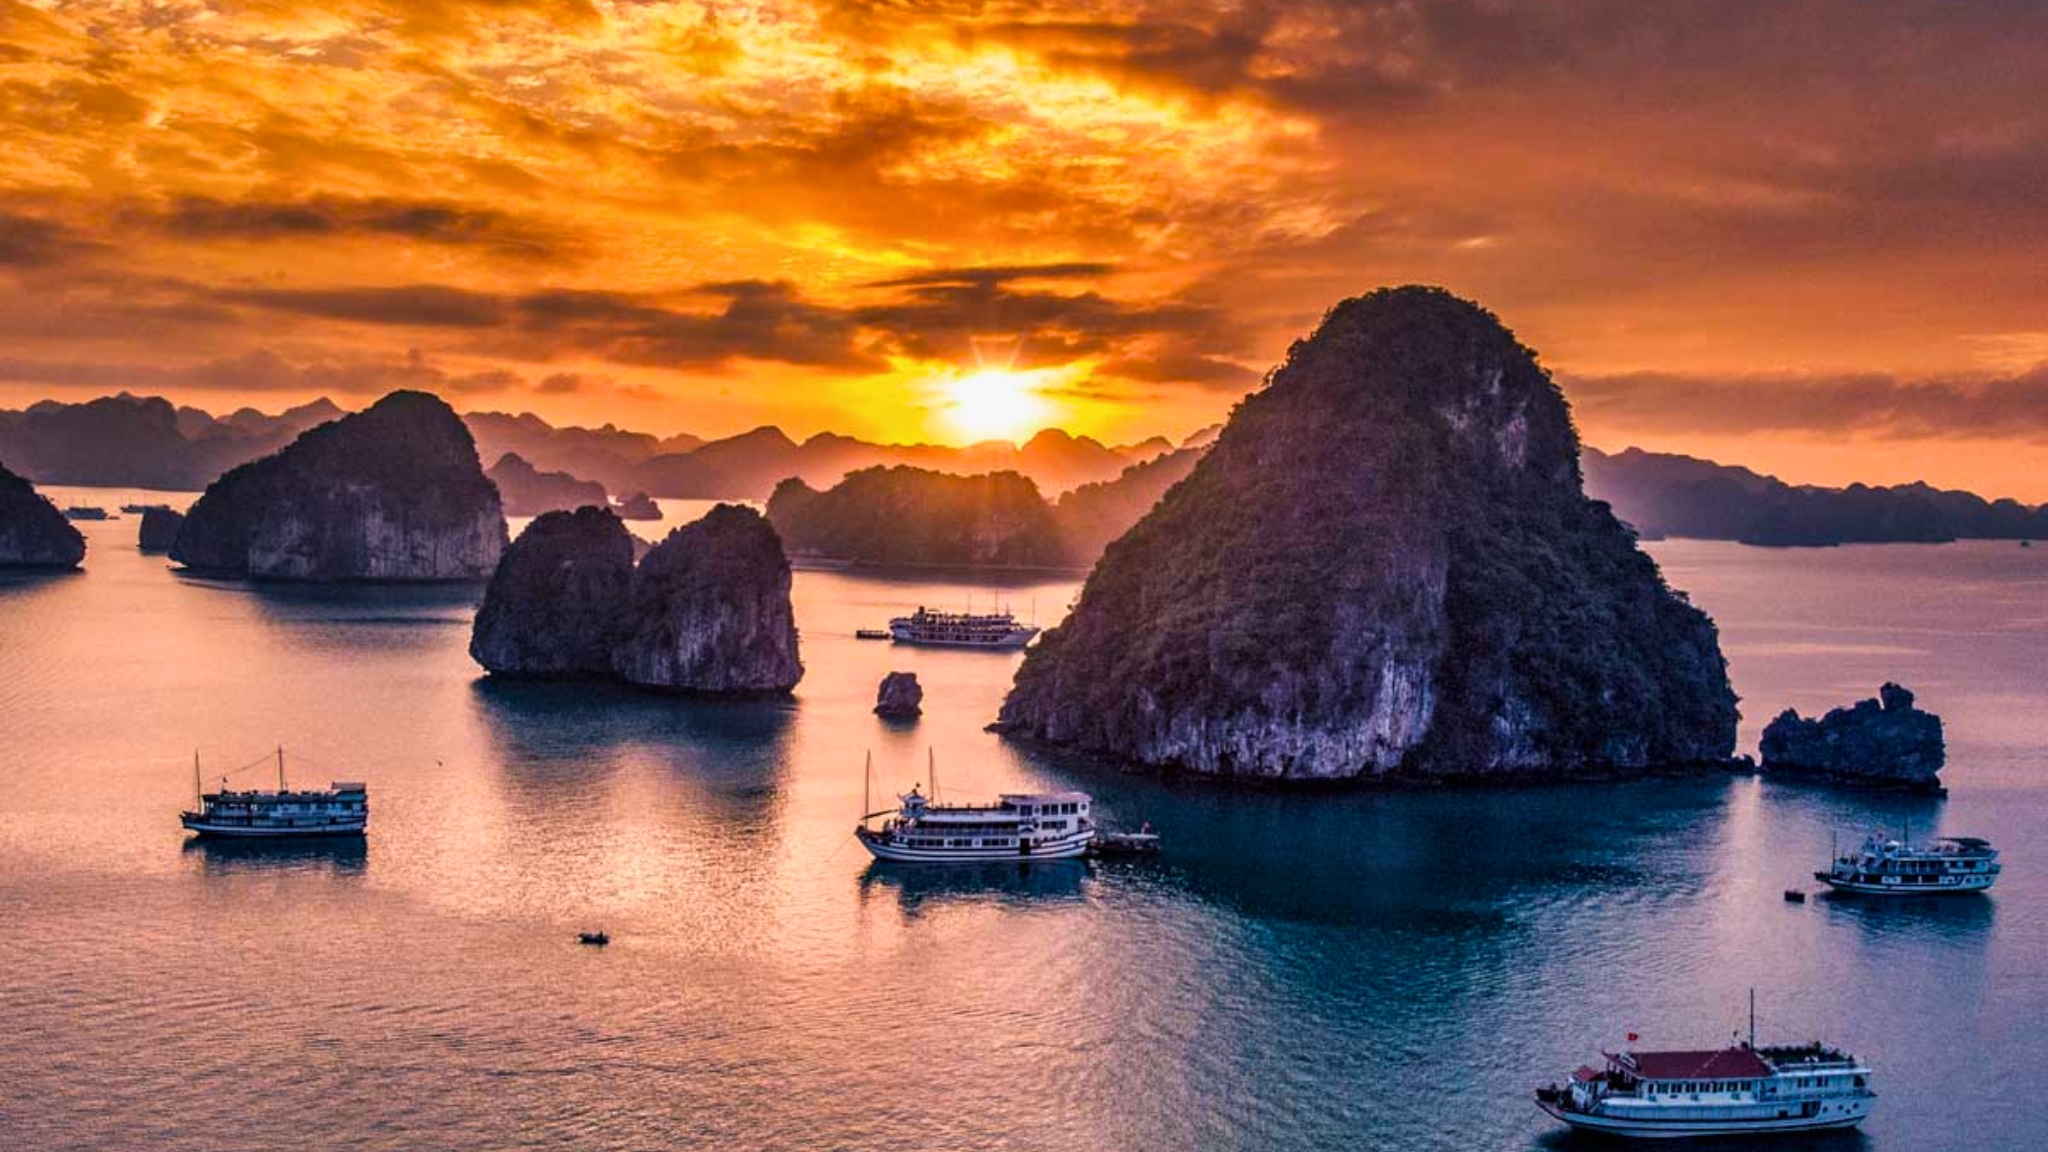 Breathtaking View Of Halong Bay In The Sunset